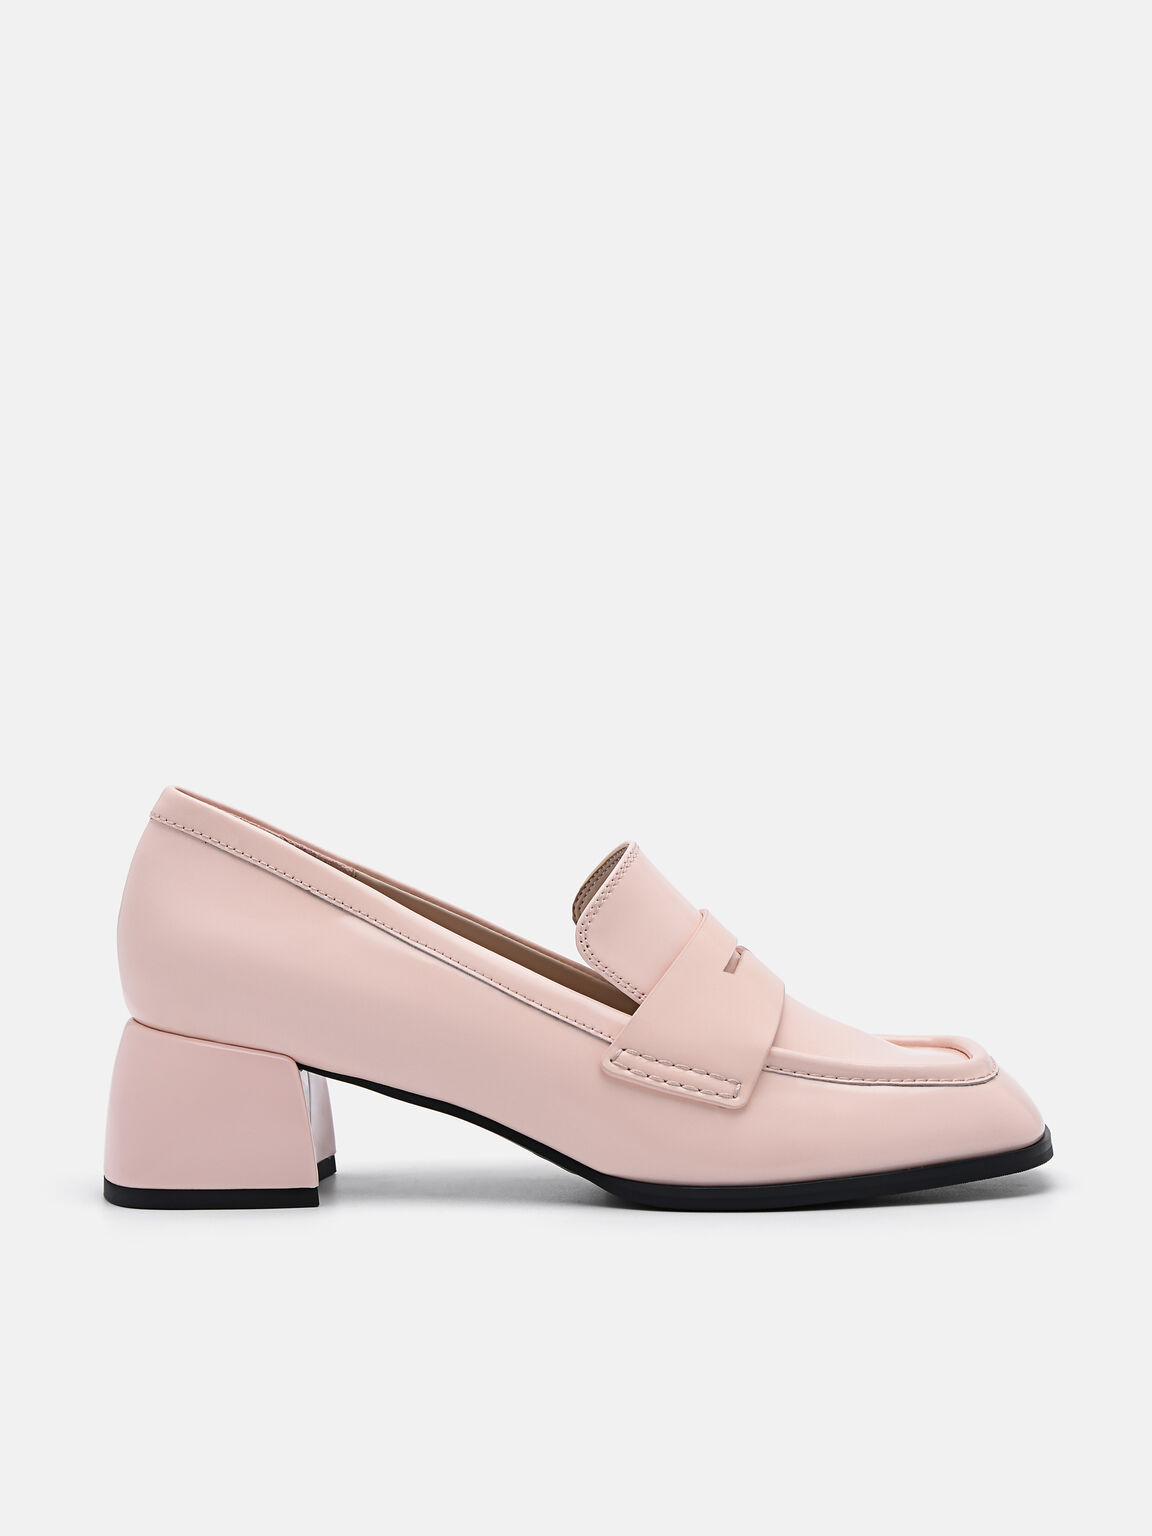 Maggie Leather Heel Loafers, Blush, hi-res